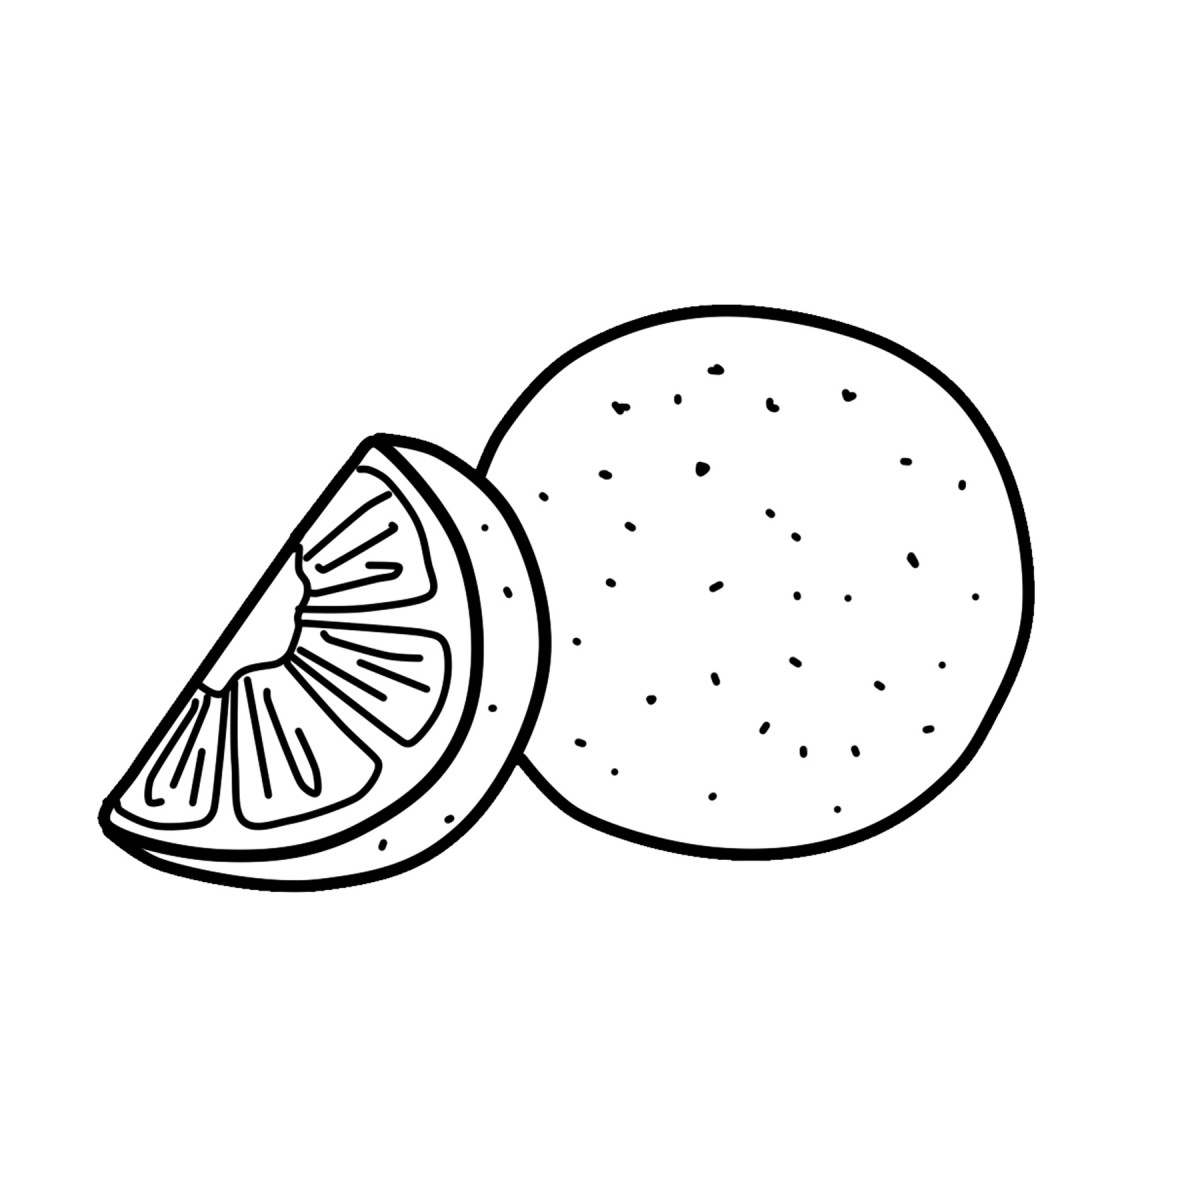 Tong hop big picture soon, the most beautiful picture for you 33 - Summary of the most beautiful pomelo coloring pictures for kids